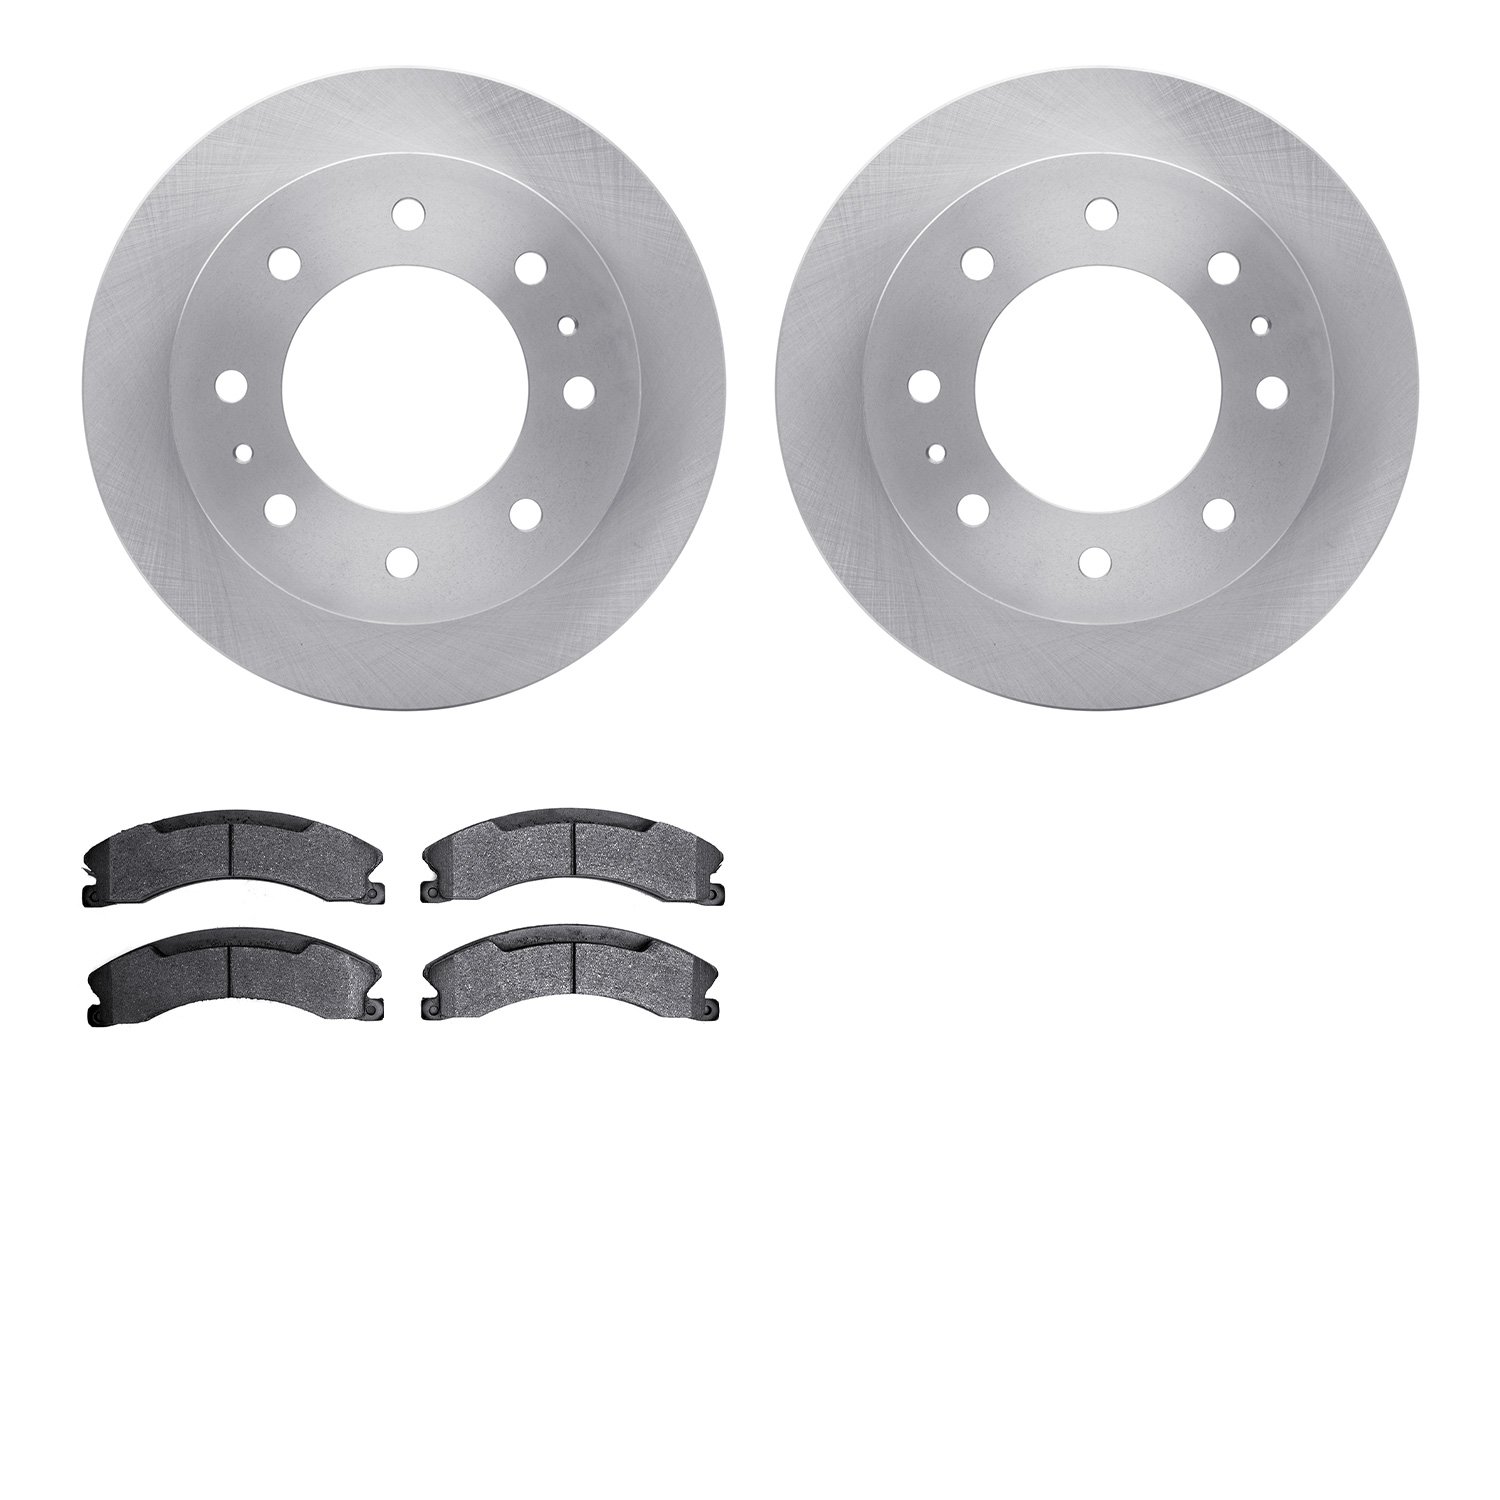 6402-48130 Brake Rotors with Ultimate-Duty Brake Pads, 2011-2019 GM, Position: Rear